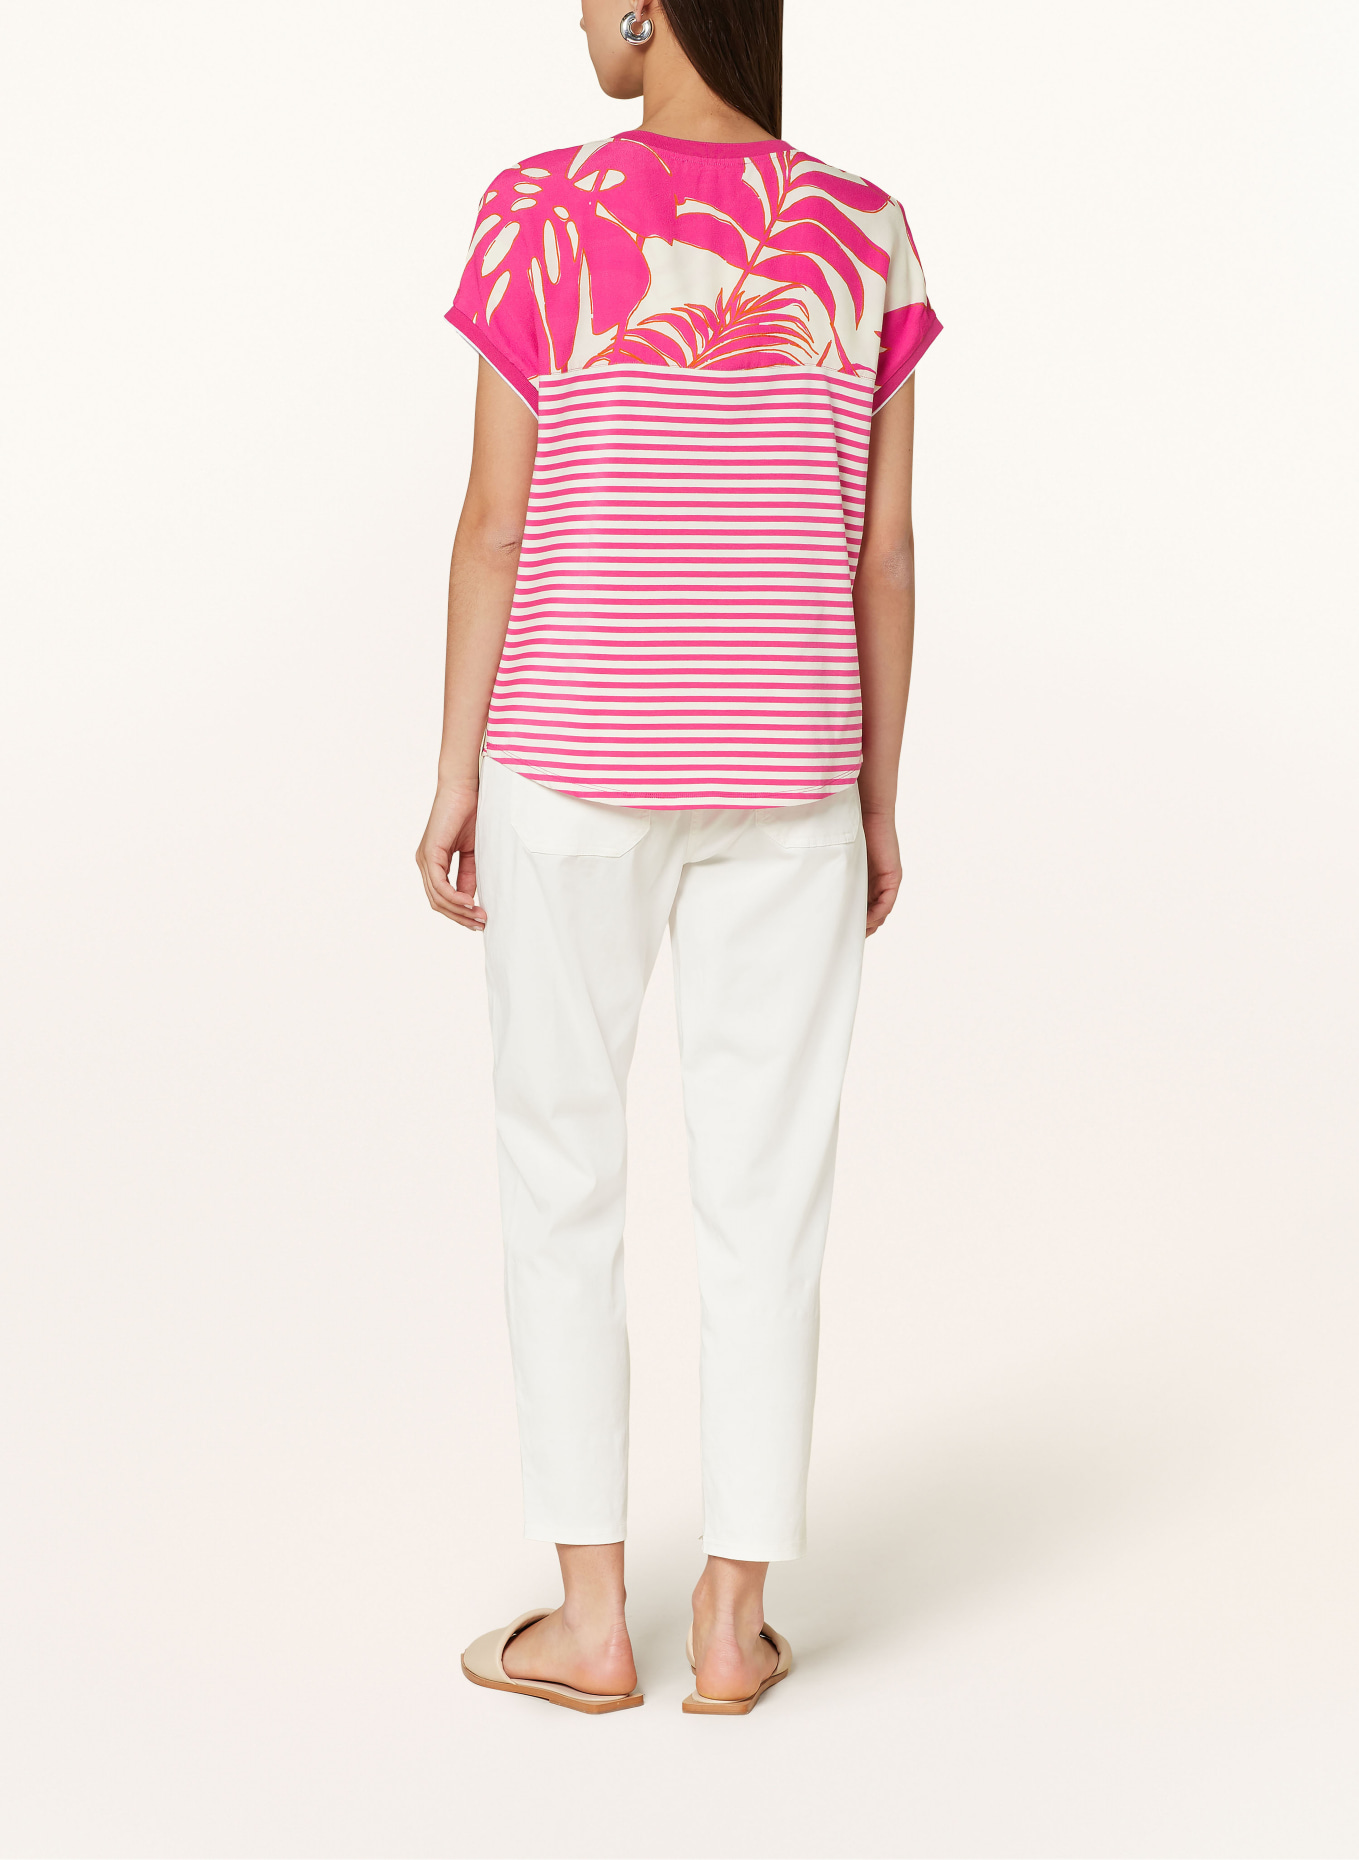 oui T-shirt in mixed materials, Color: PINK/ CREAM/ ORANGE (Image 3)